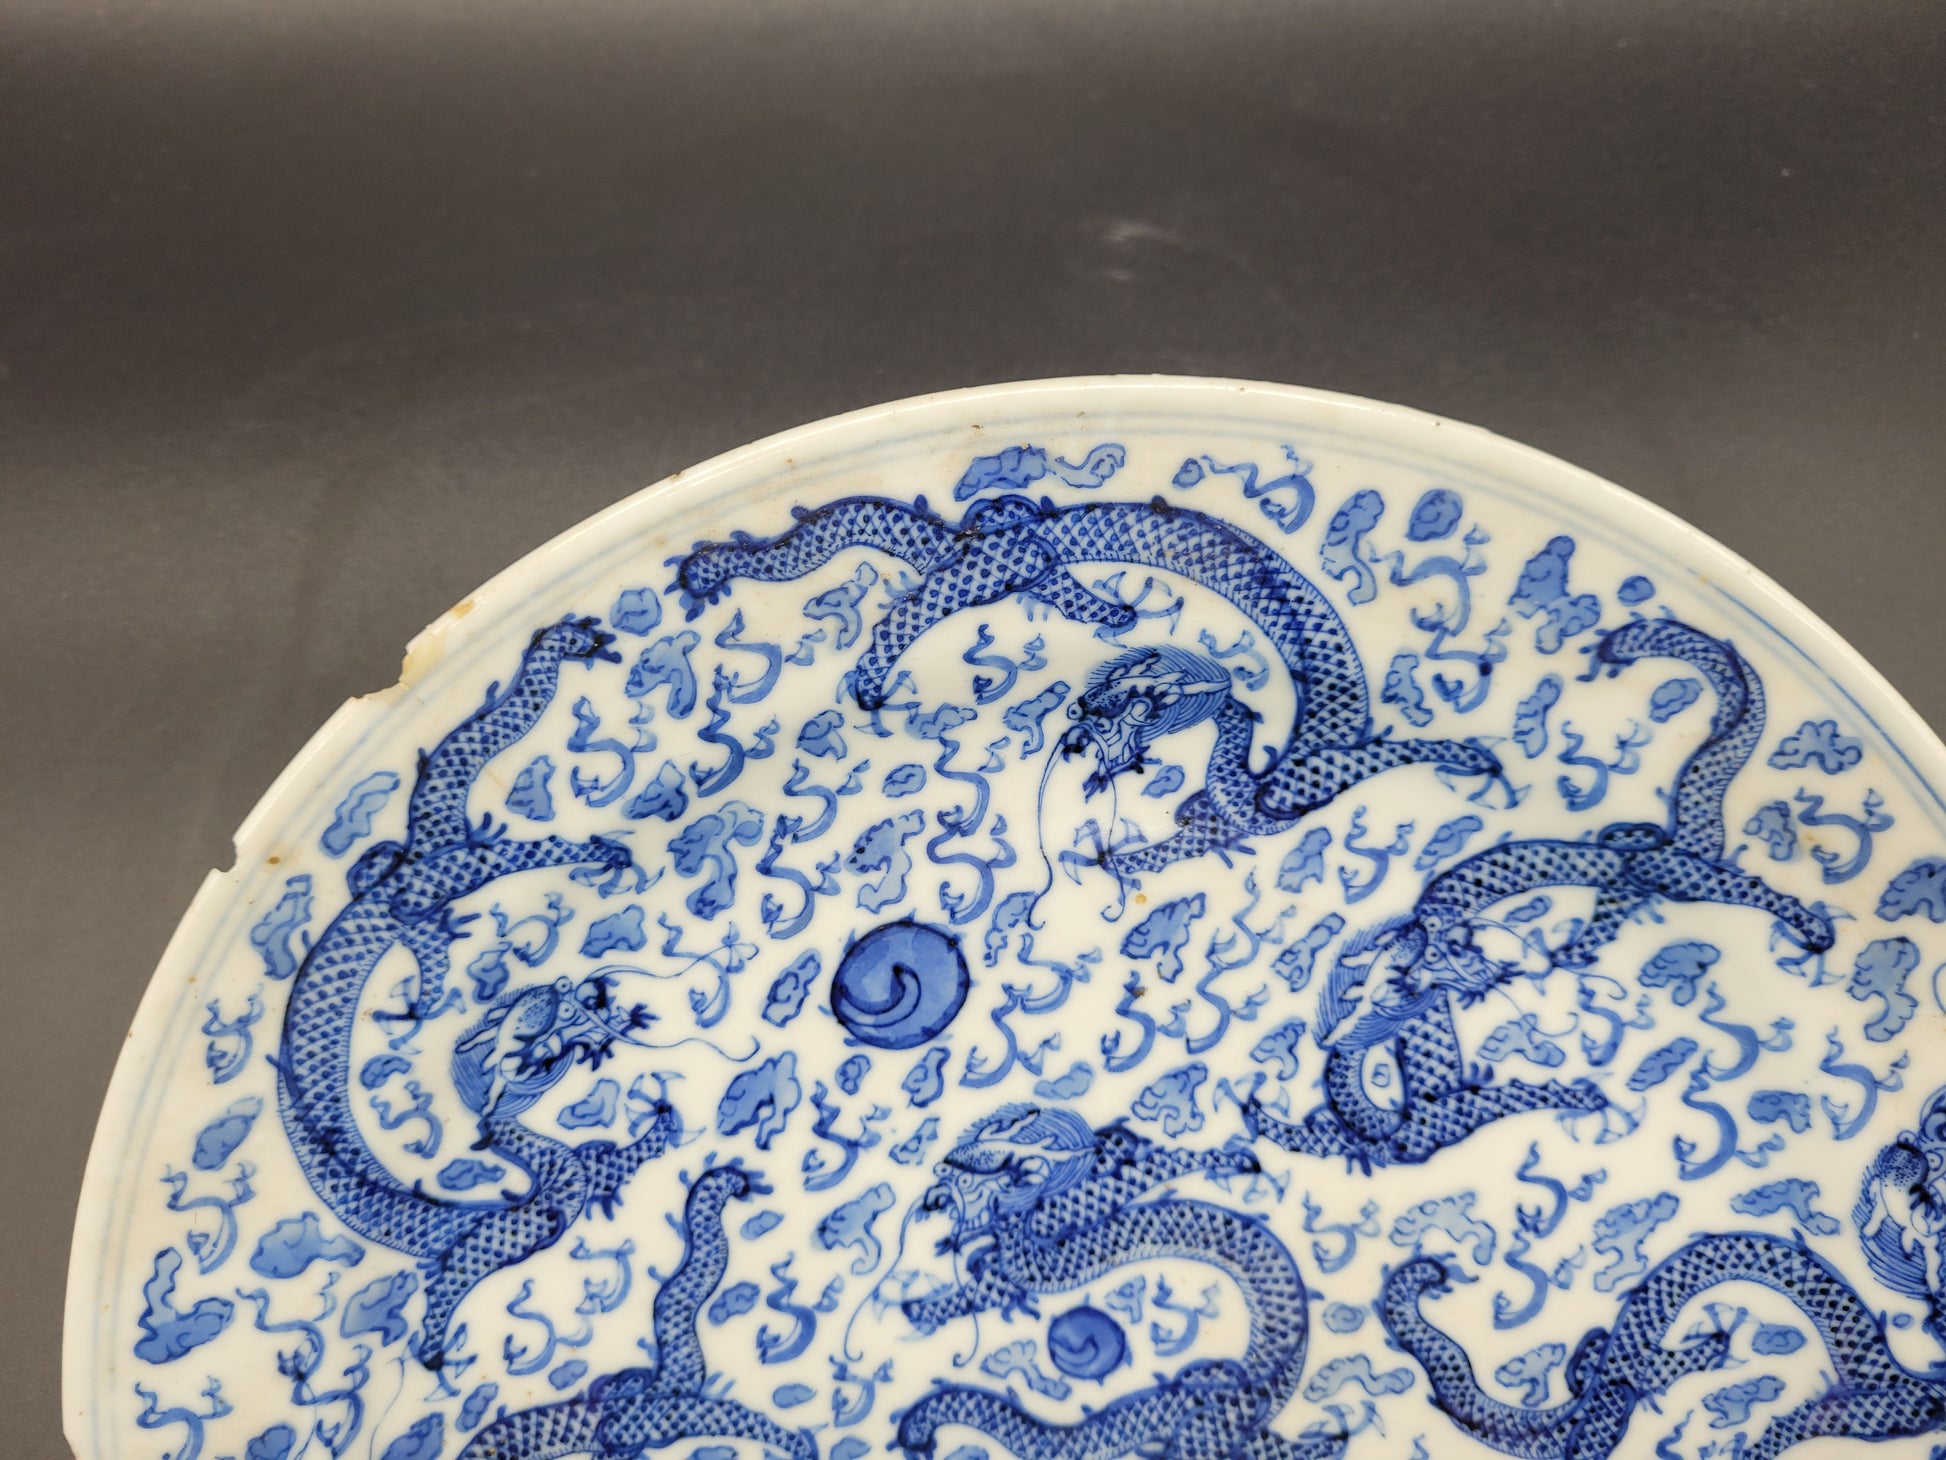 ANTIQUES & COLLECTABLES Beautiful Chinese Kangxi Period ( 1662-1722 ) Blue and White Dragon Plate 